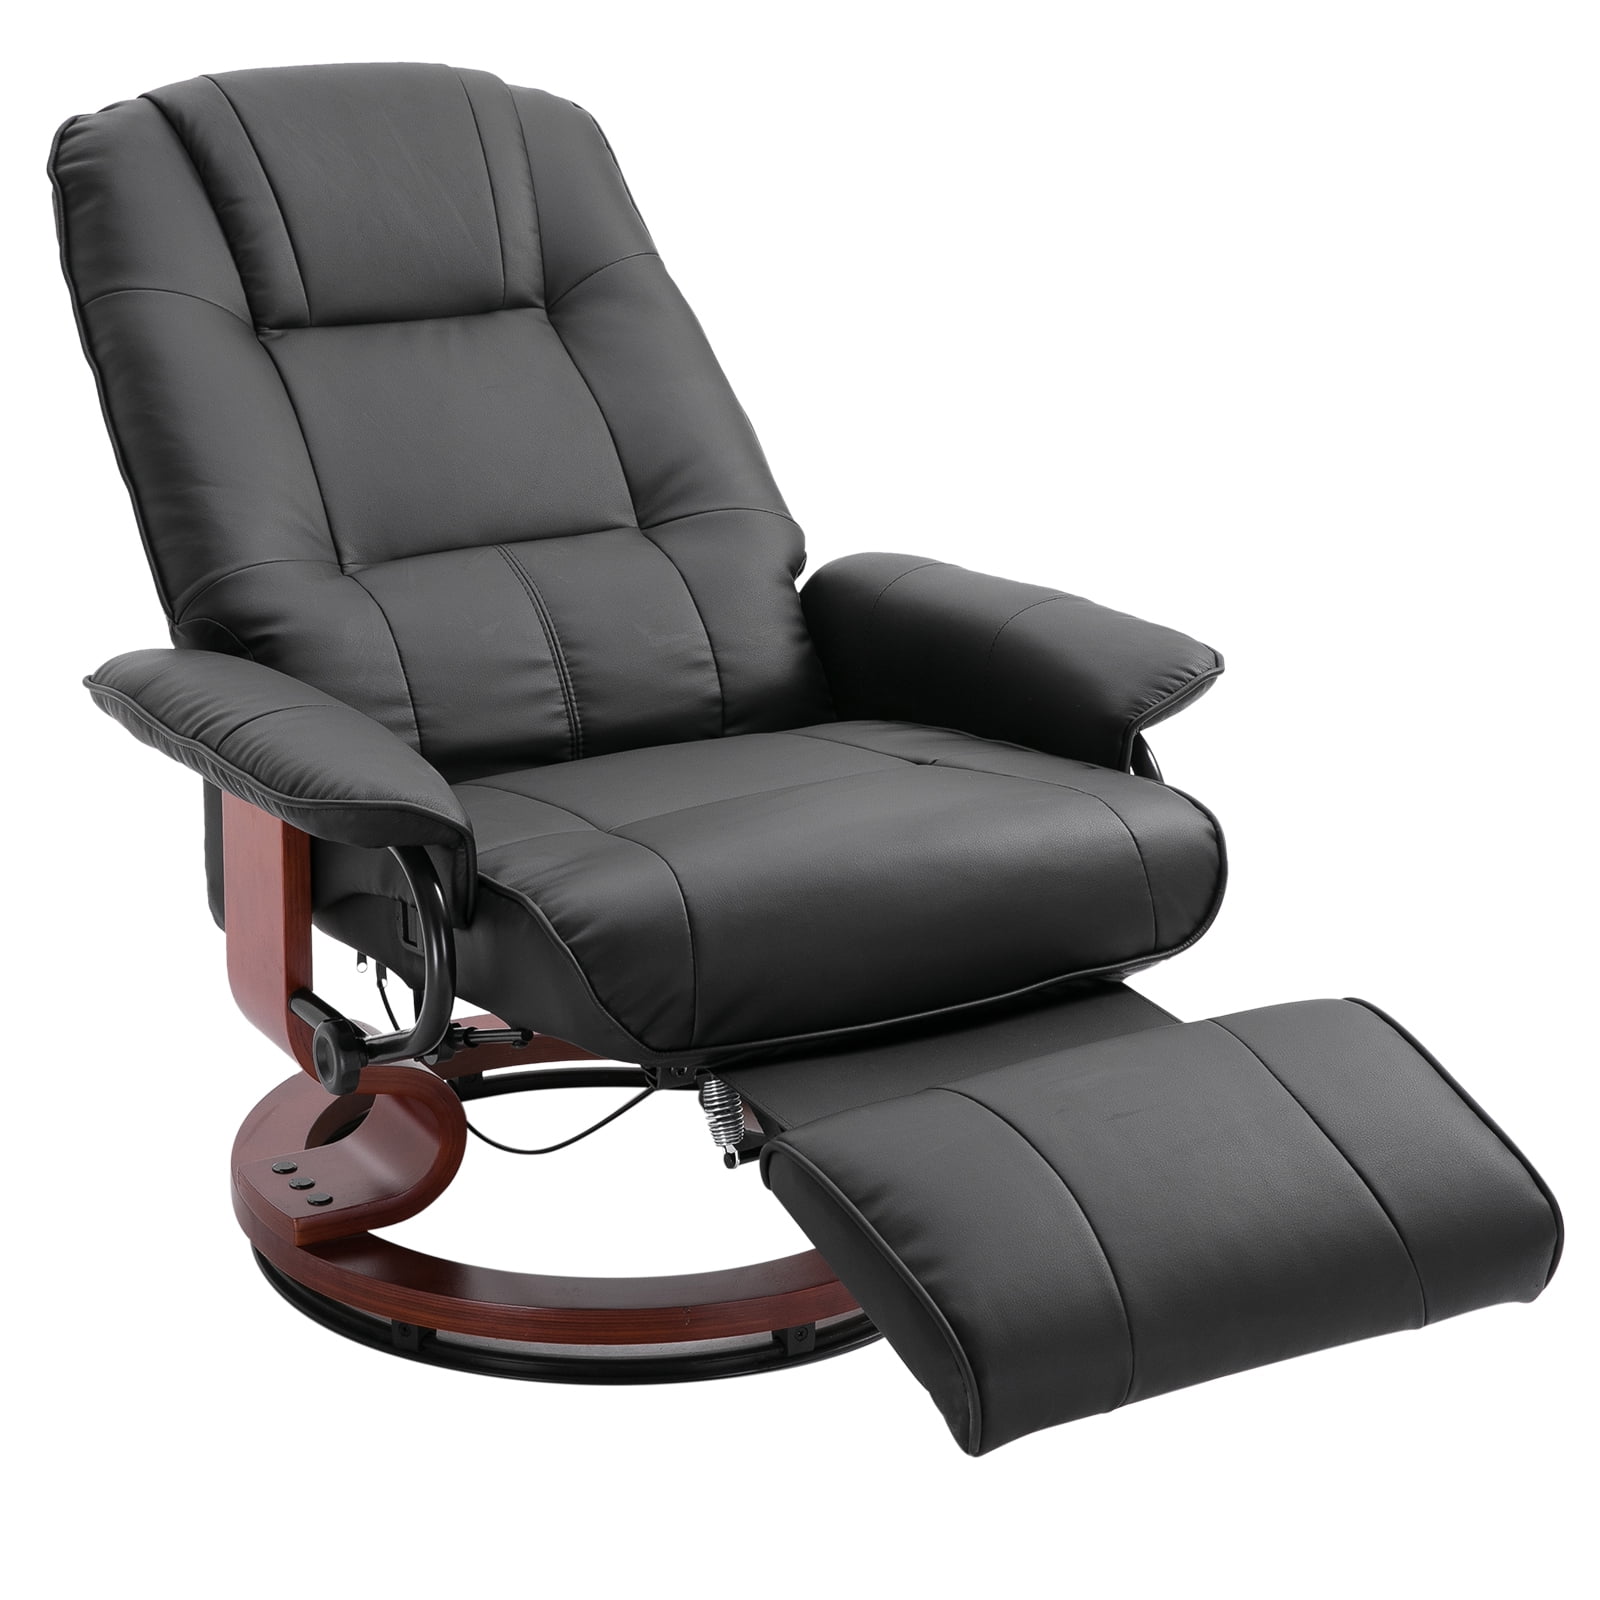 HOMCOM Adjustable Swivel Recliner Chair with Footrest Manual